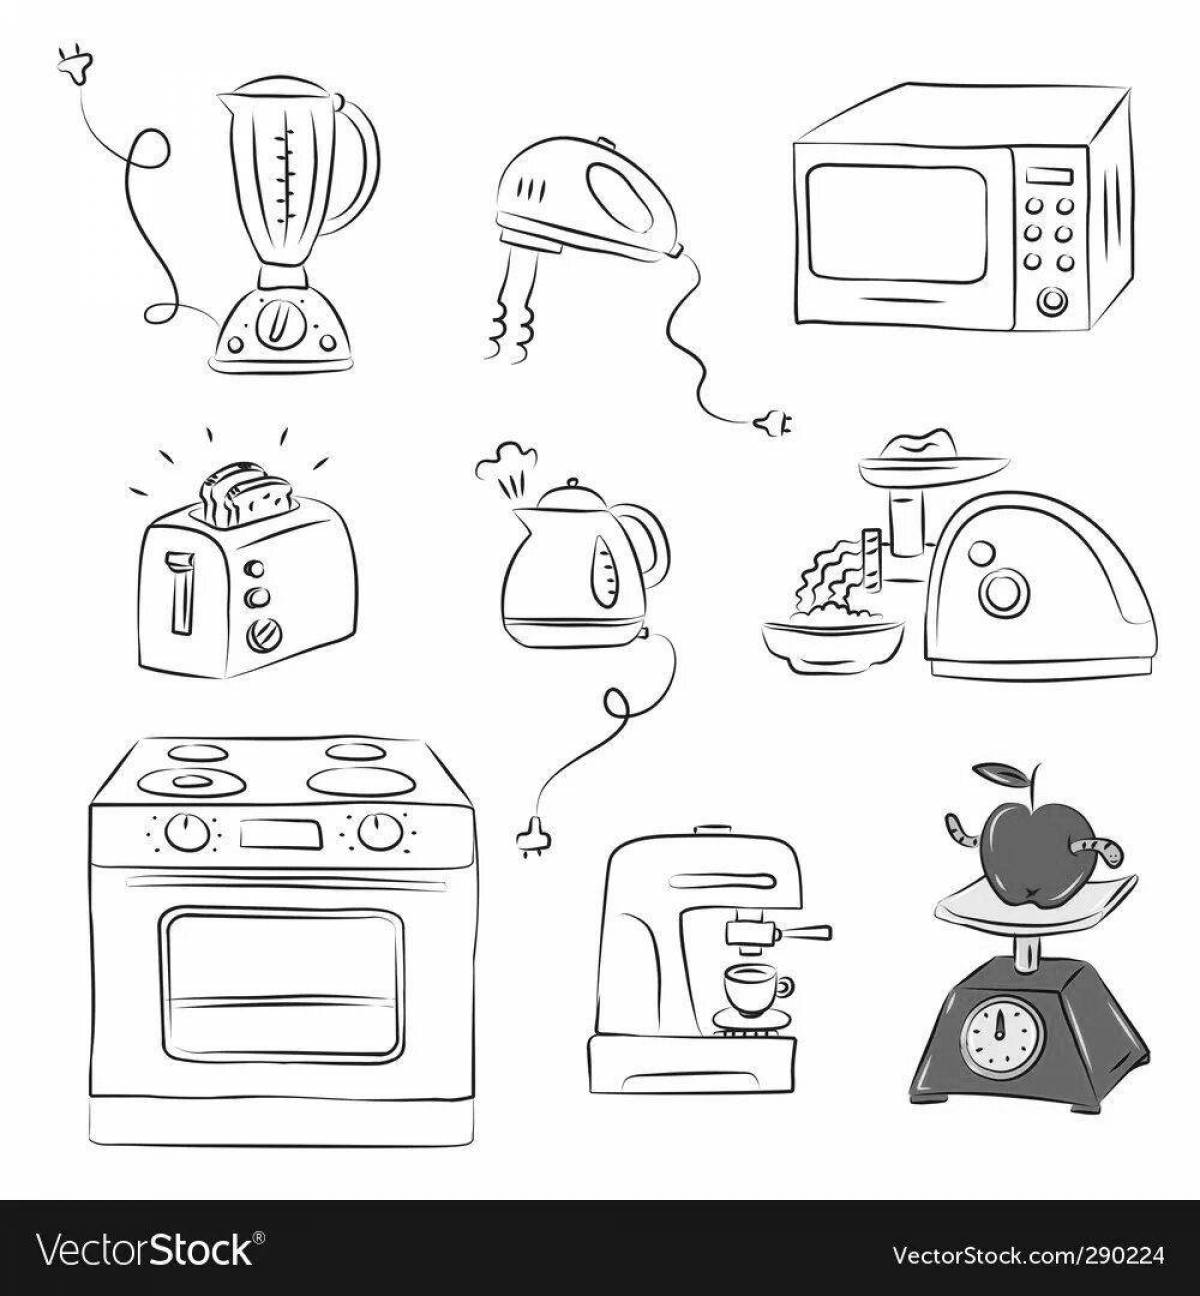 Coloring for bright electrical appliances for children